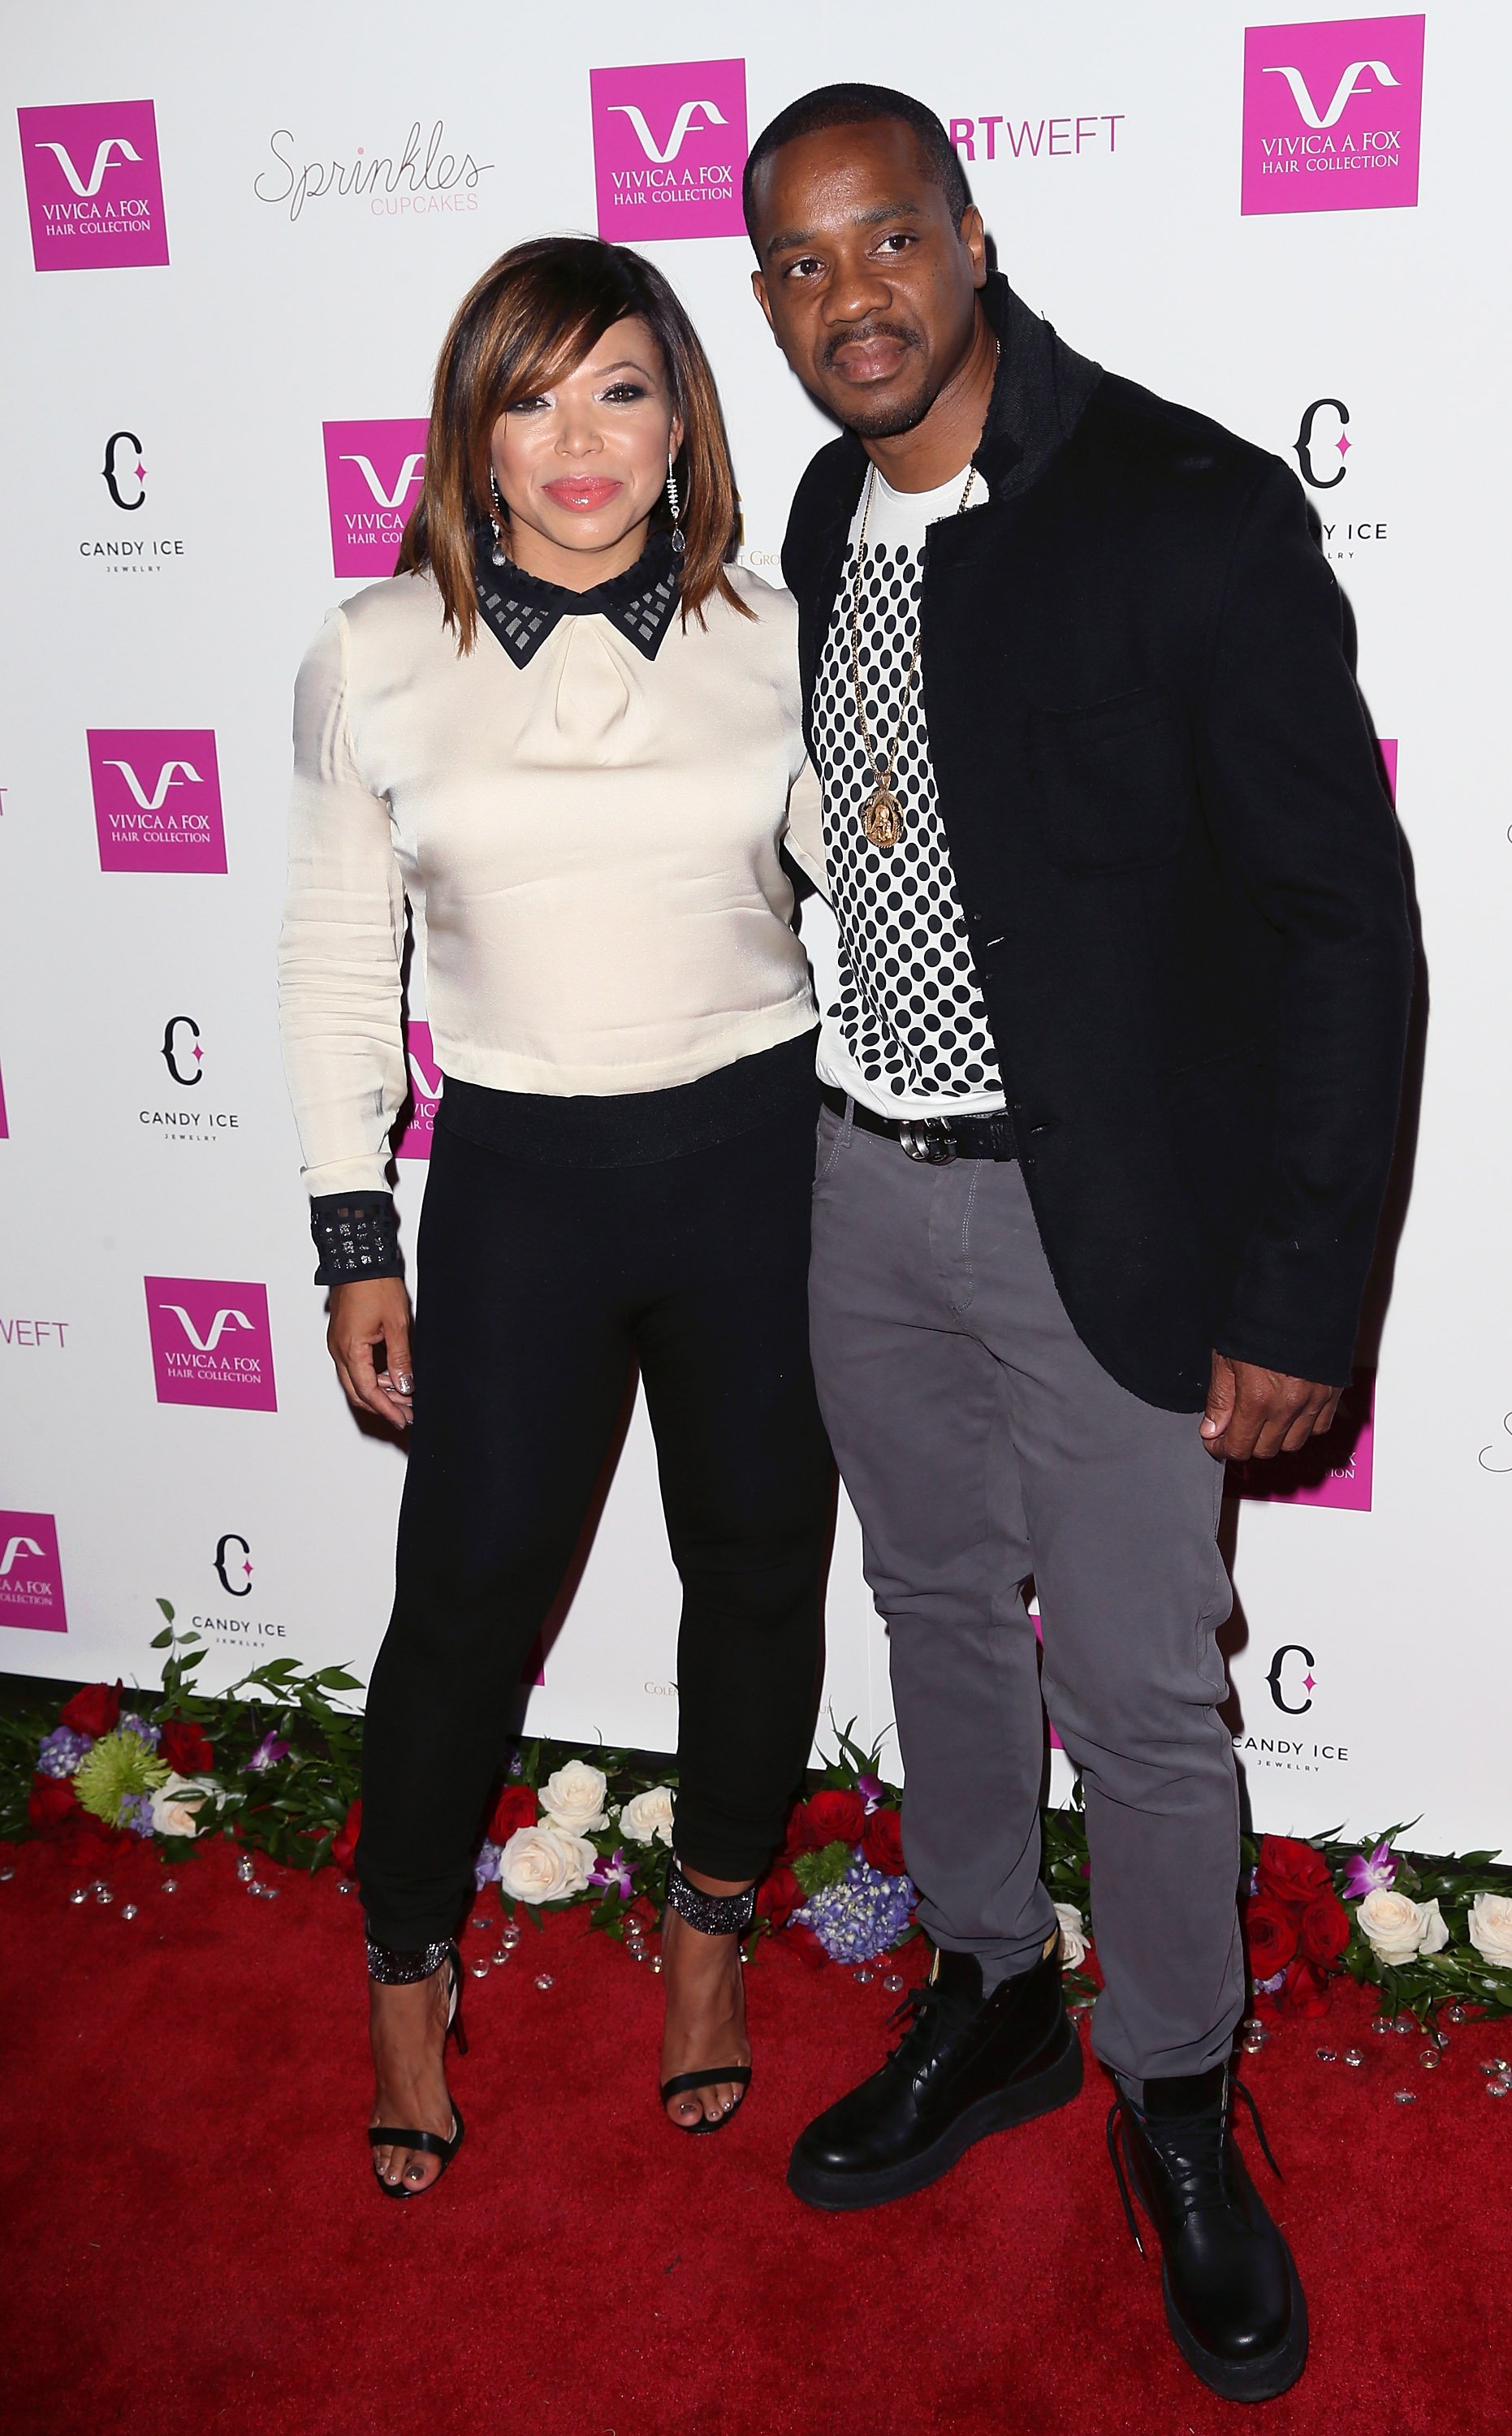 Tisha Campbell & Duane Martin at Vivica A. Fox’s 50th birthday celebration on Aug. 2, 2014 in California | Photo: Getty Images 